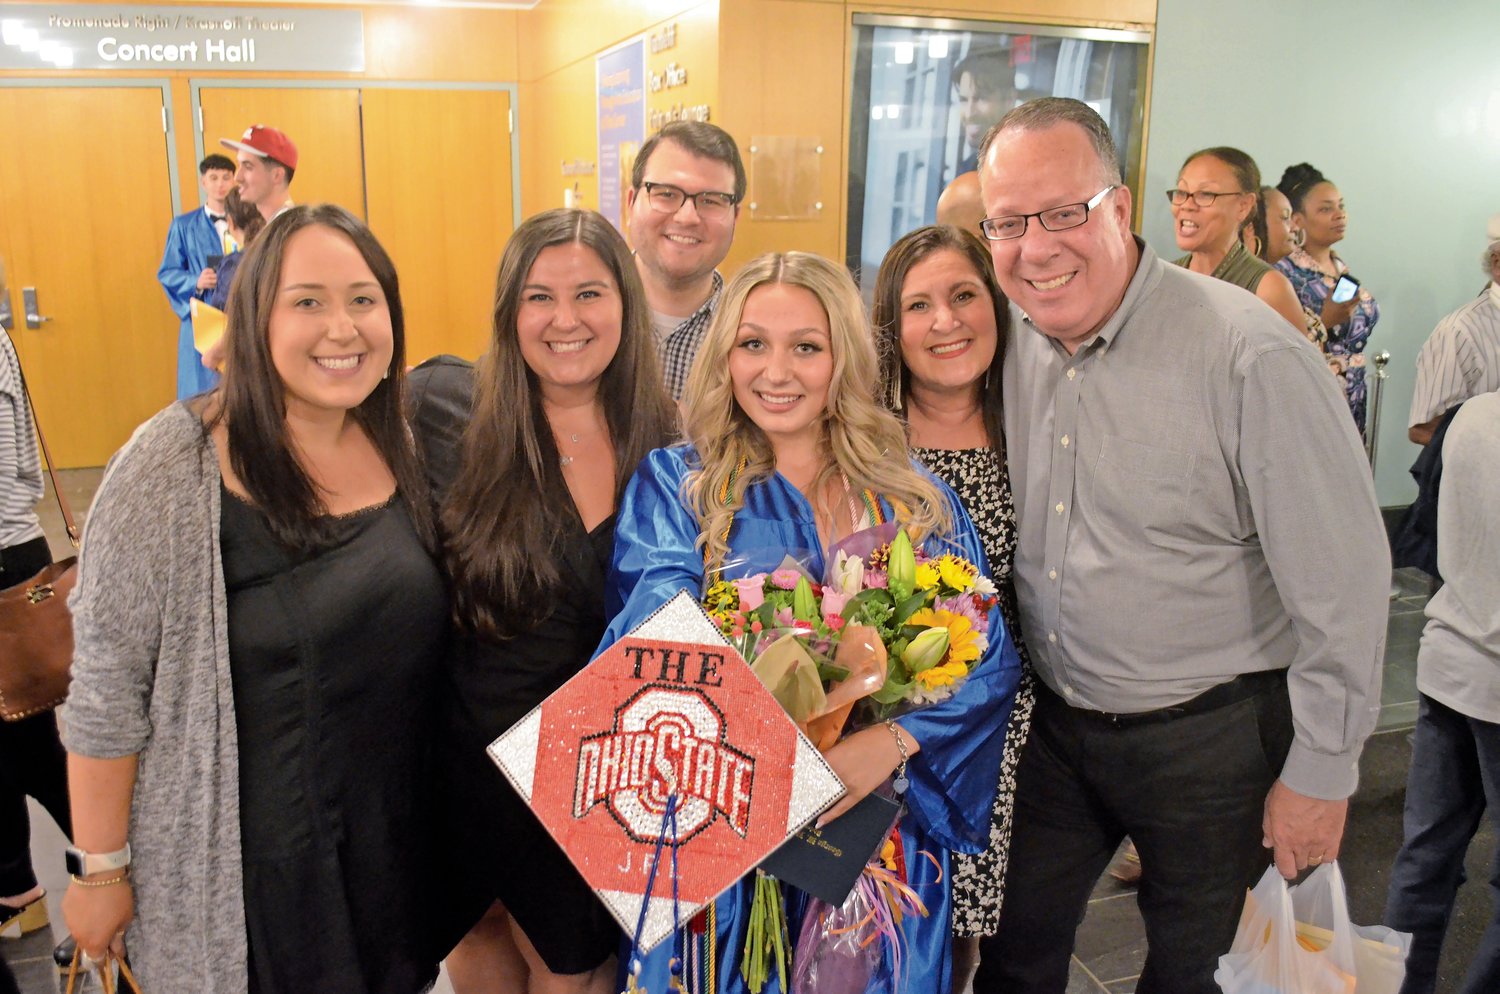 Jessica Lubliner is headed to The Ohio State University and her family was all smiles after Hewlett High’s commencement.